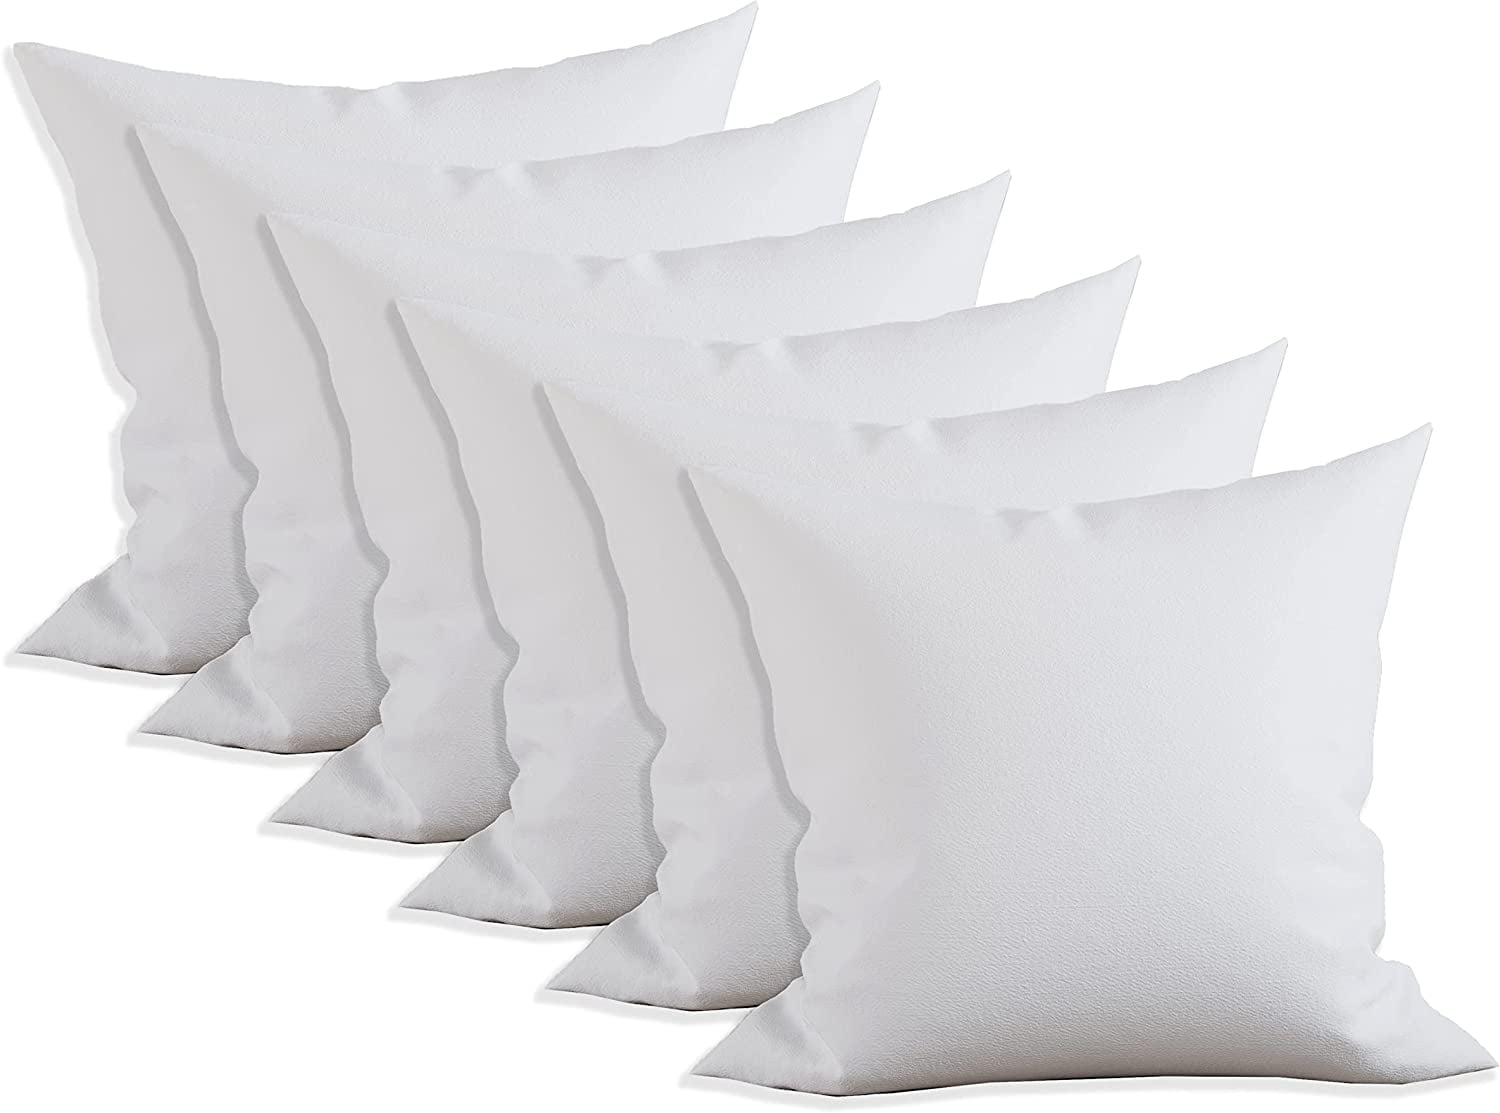 APSMILE Goose Down Feather Throw Pillow Inserts 2 Pack - 16x16 Square  Decorative Pillow Inserts for Bed, Sofa, Couch, White